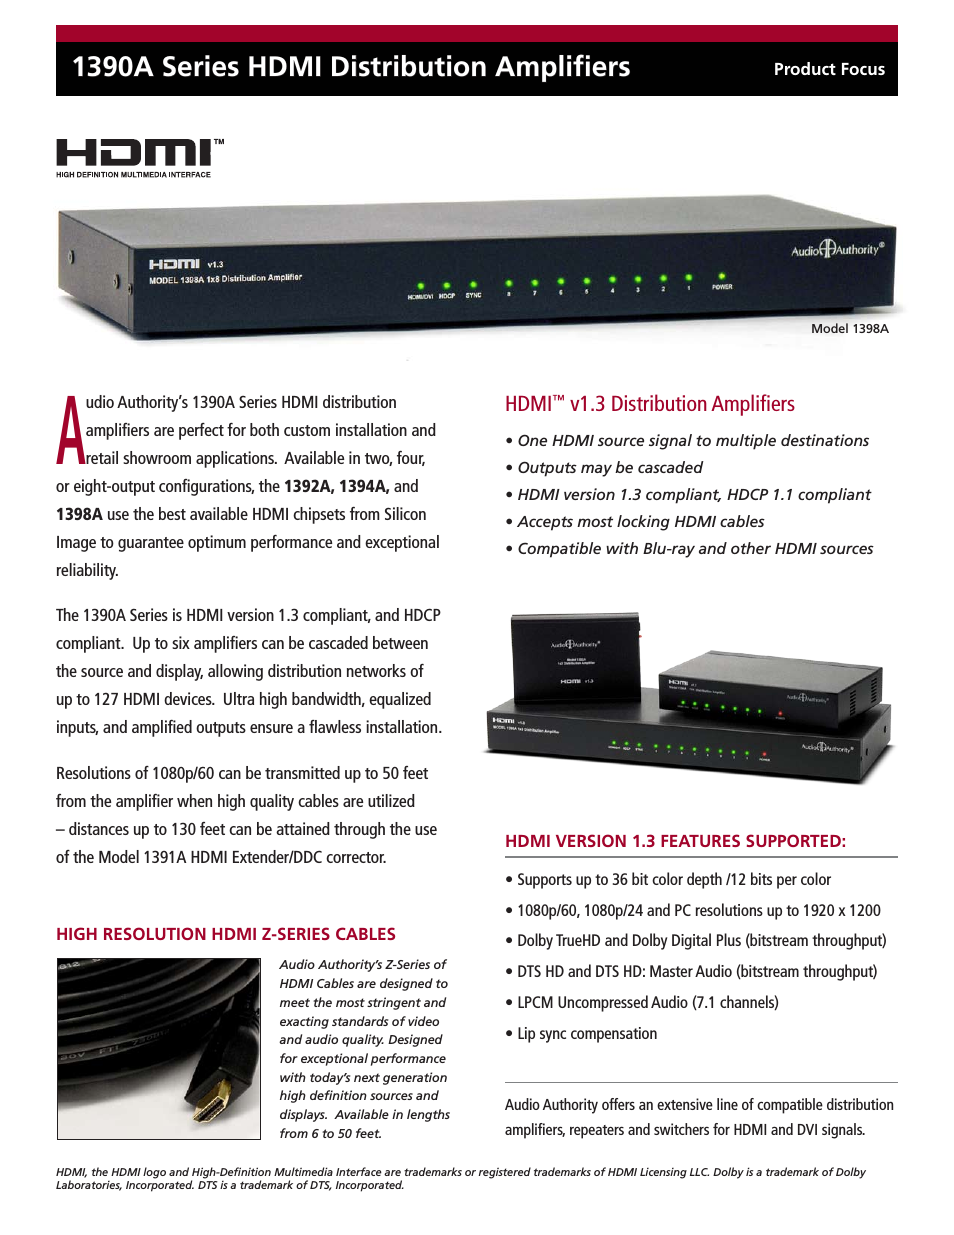 HDMI Distribution Amplifiers 1390A Series